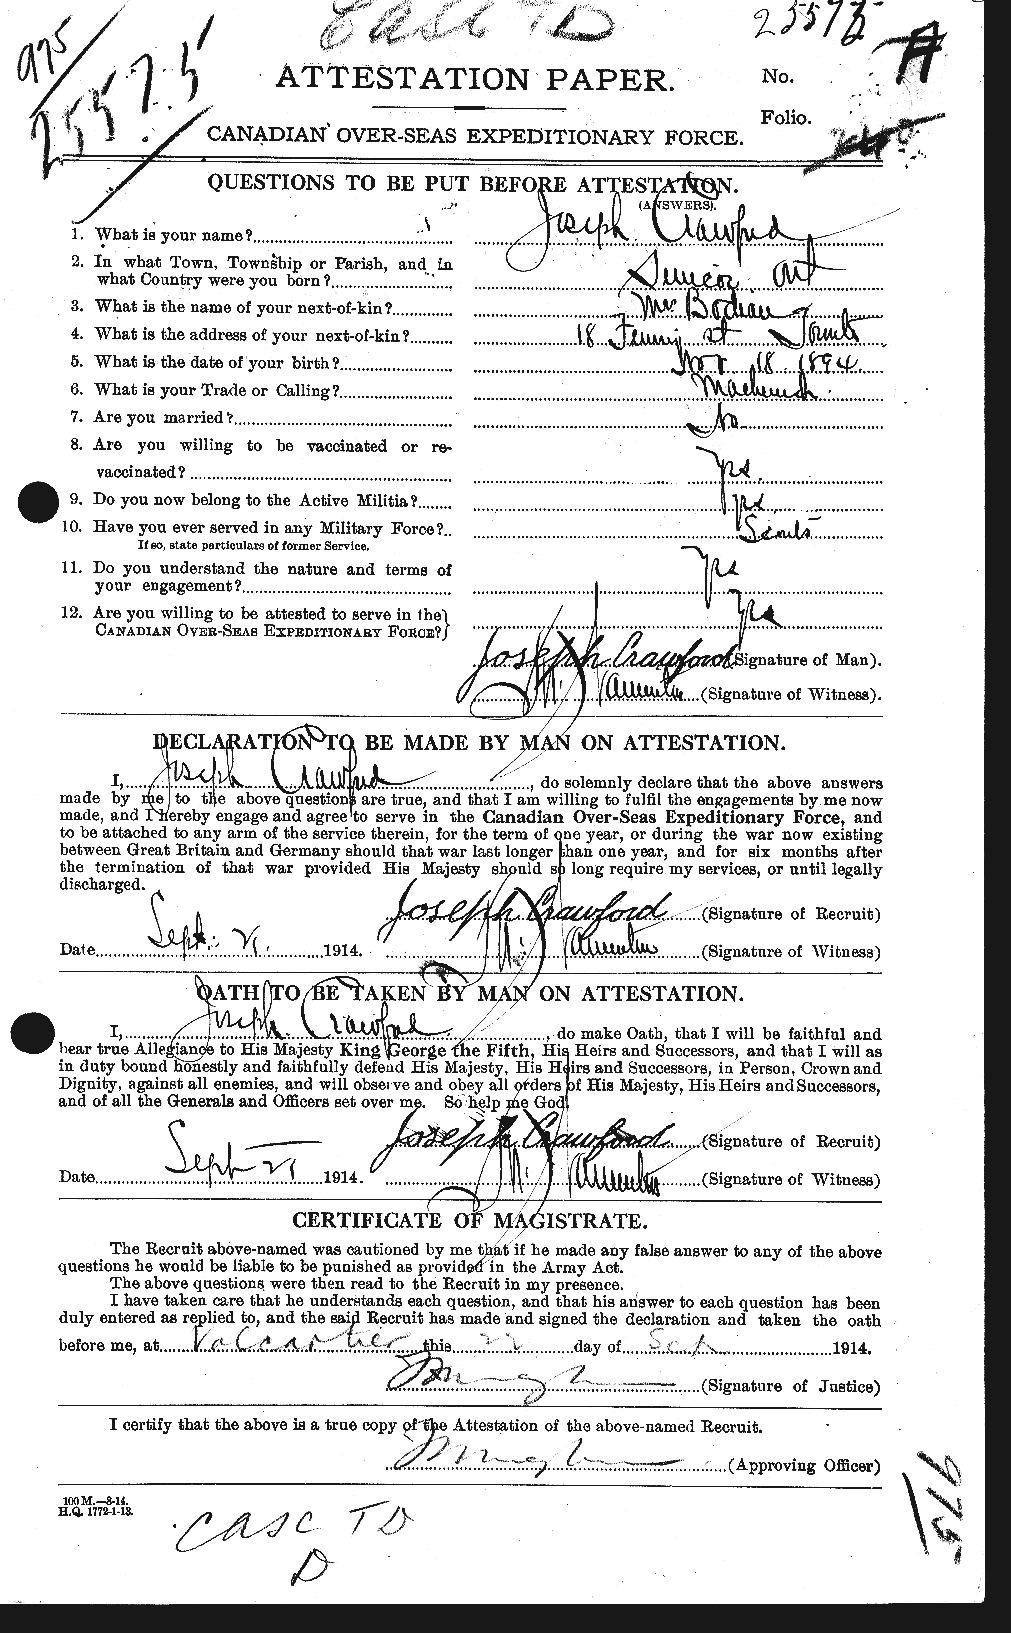 Personnel Records of the First World War - CEF 061813a